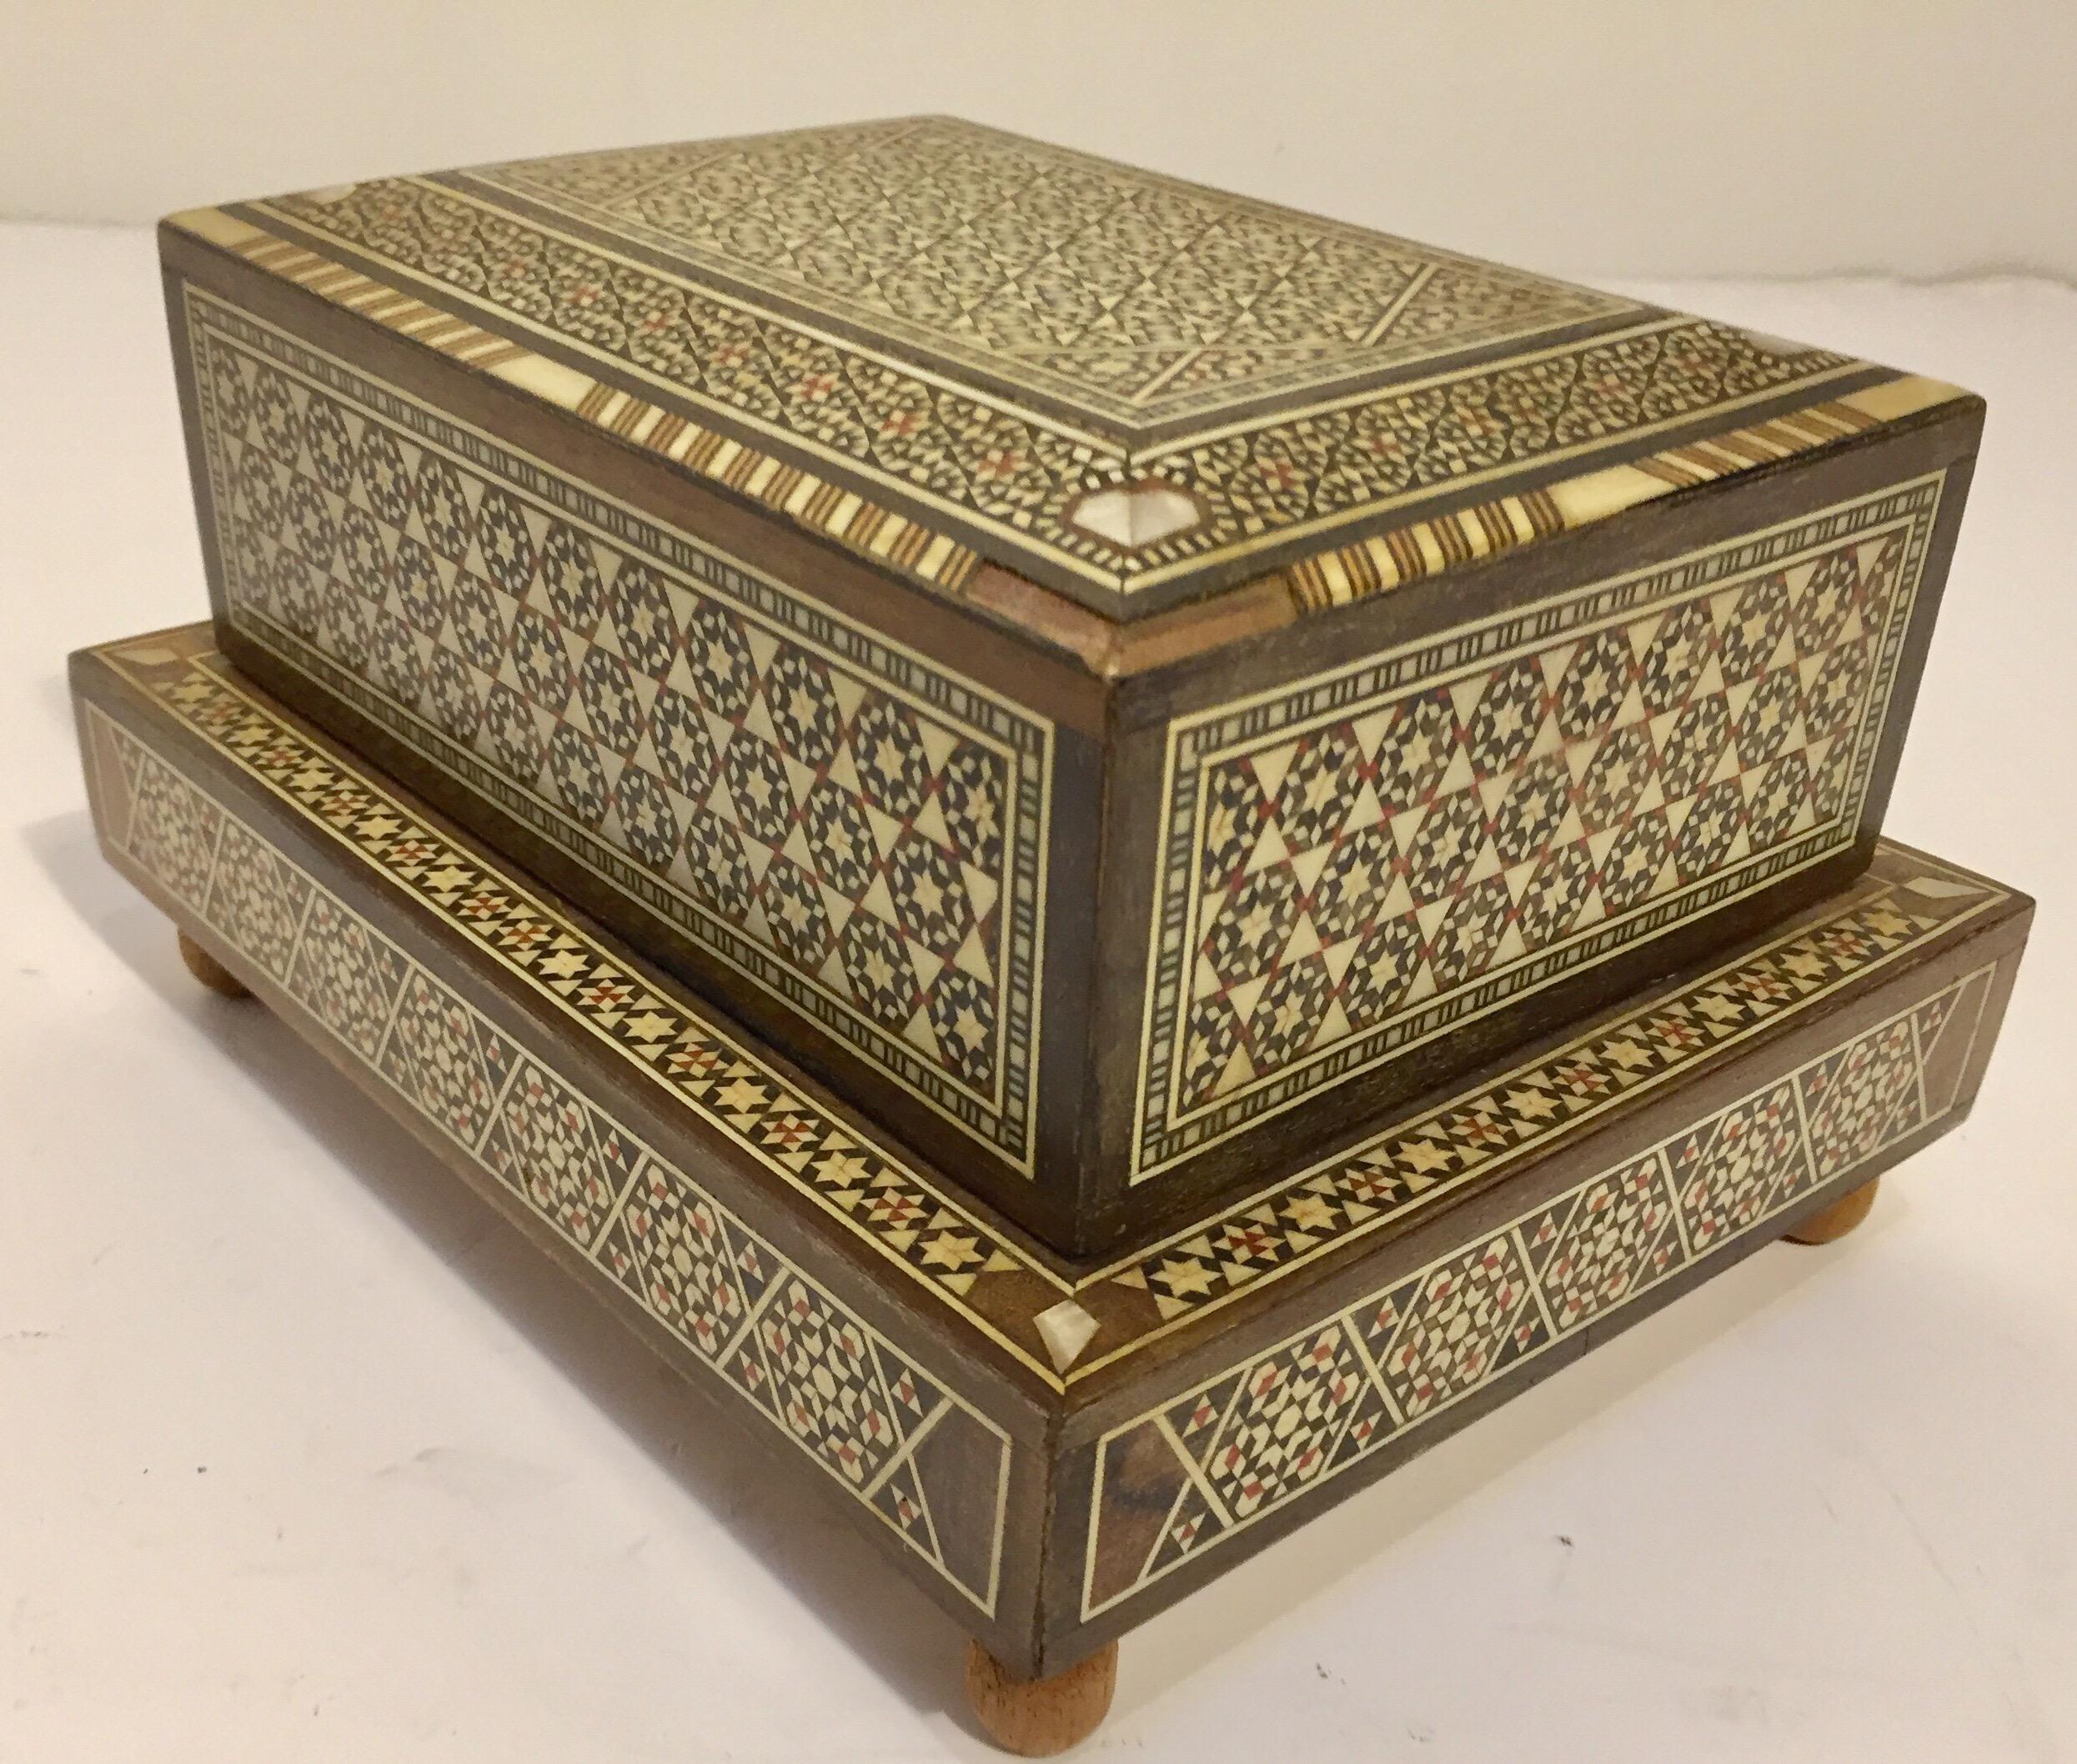 Vintage Syrian cigarette music box inlaid with mother of pearl, ivory and ebony.
Handcrafted very fine Moorish Sadeli micro mosaic inlaid geometric marquetry artwork.
These Middle Eastern boxes are used to store cigarettes and play music when you